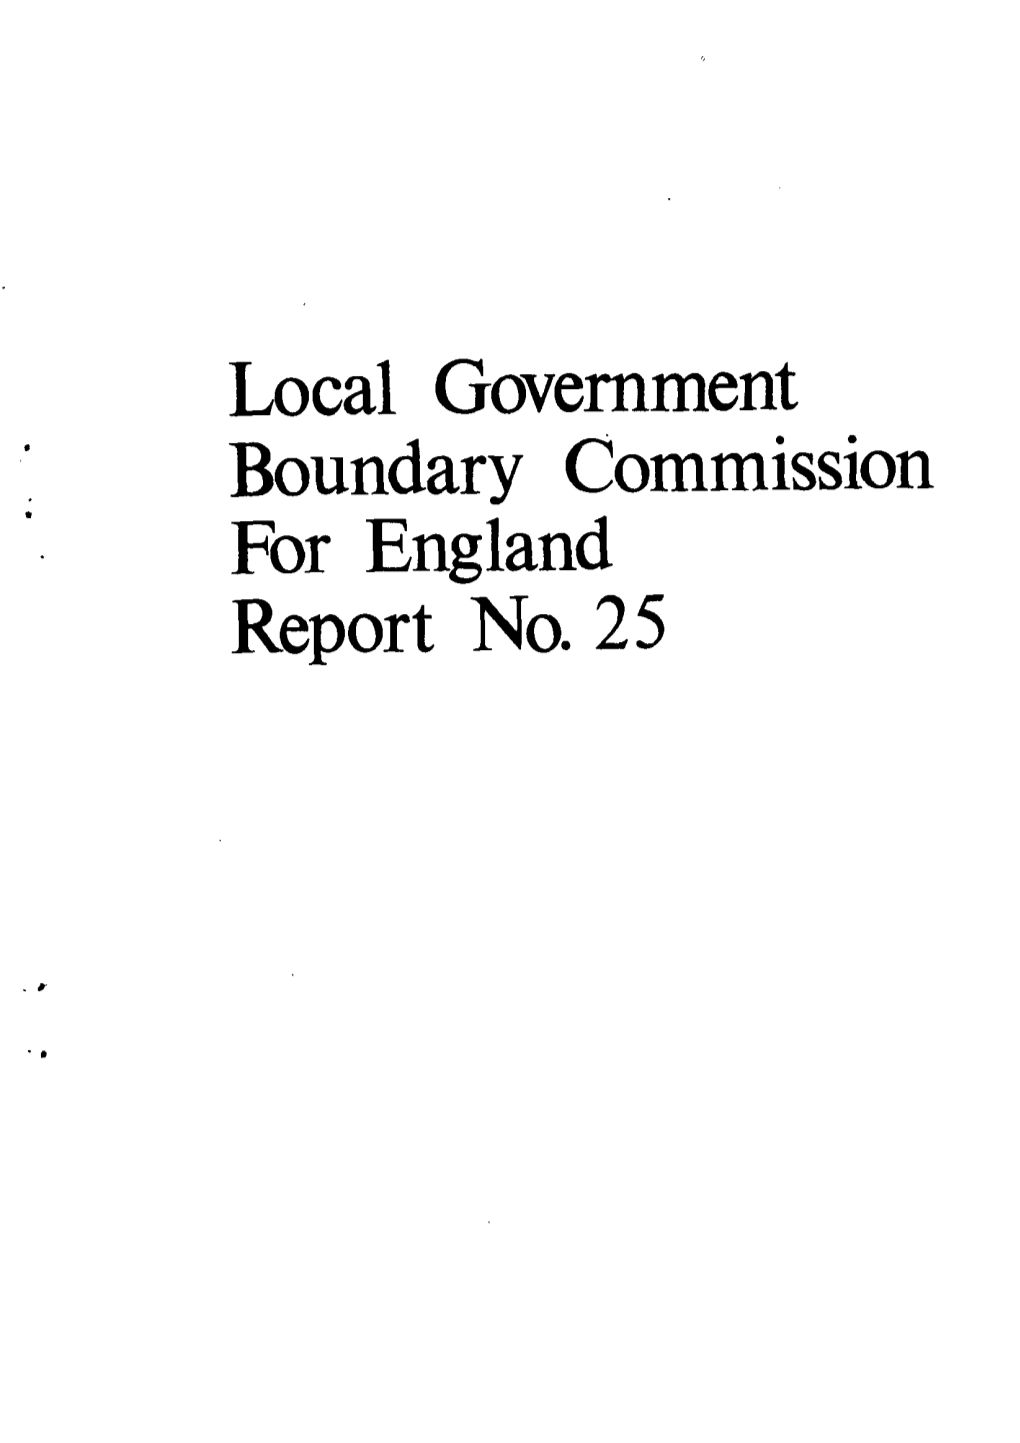 Local Government Boundary Commission for England Report No. 25 LOCAL GOVERNMENT